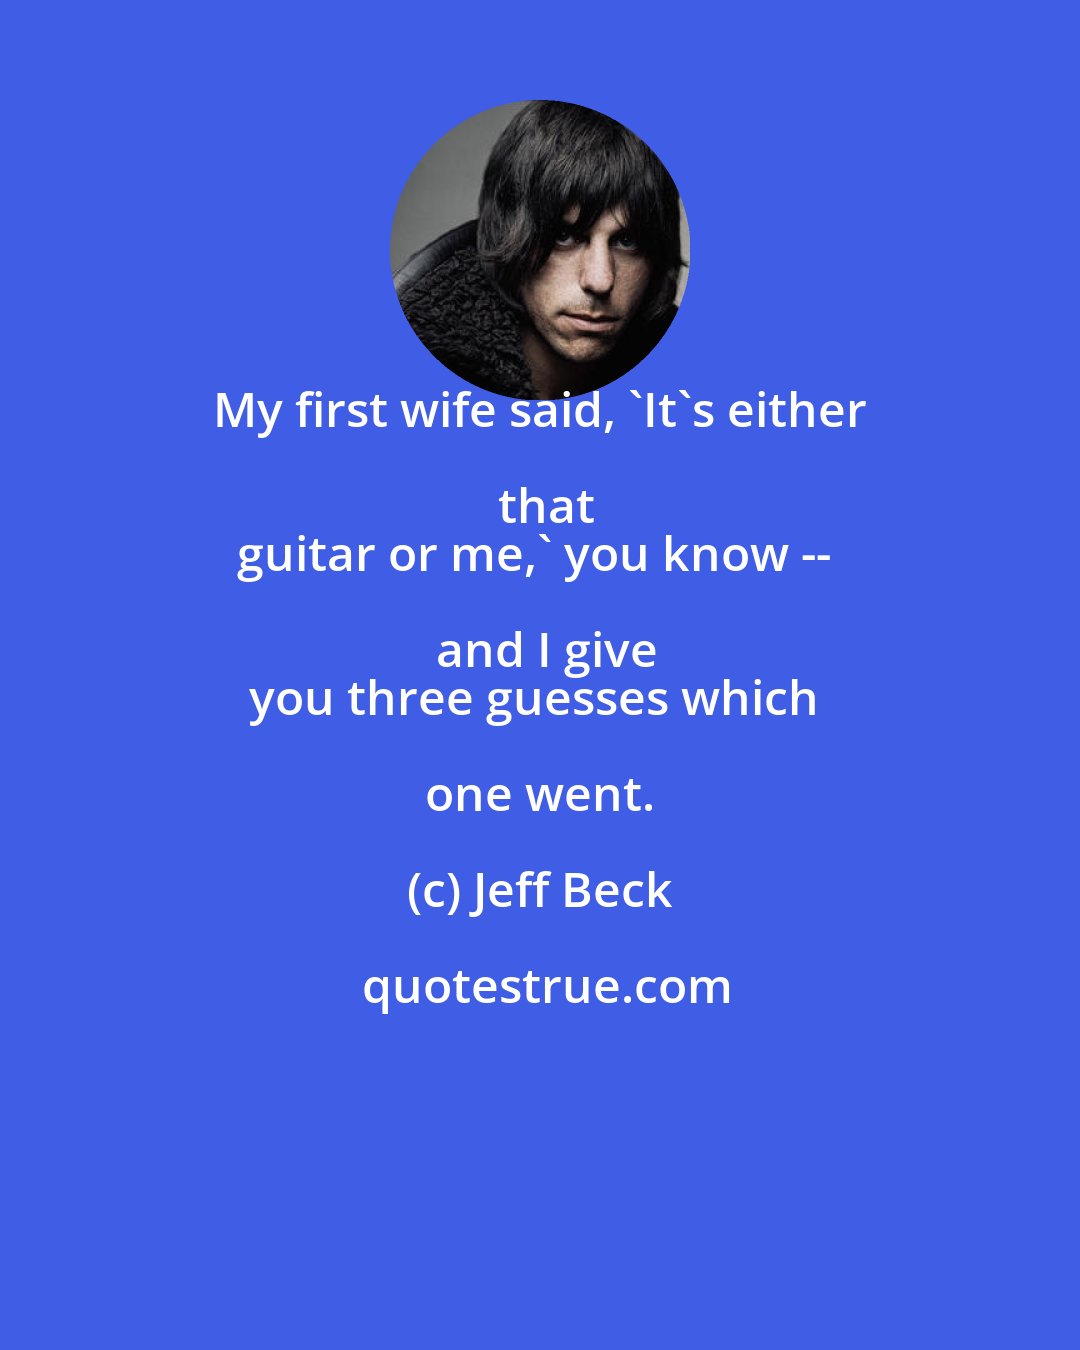 Jeff Beck: My first wife said, 'It's either that
guitar or me,' you know -- and I give
you three guesses which one went.